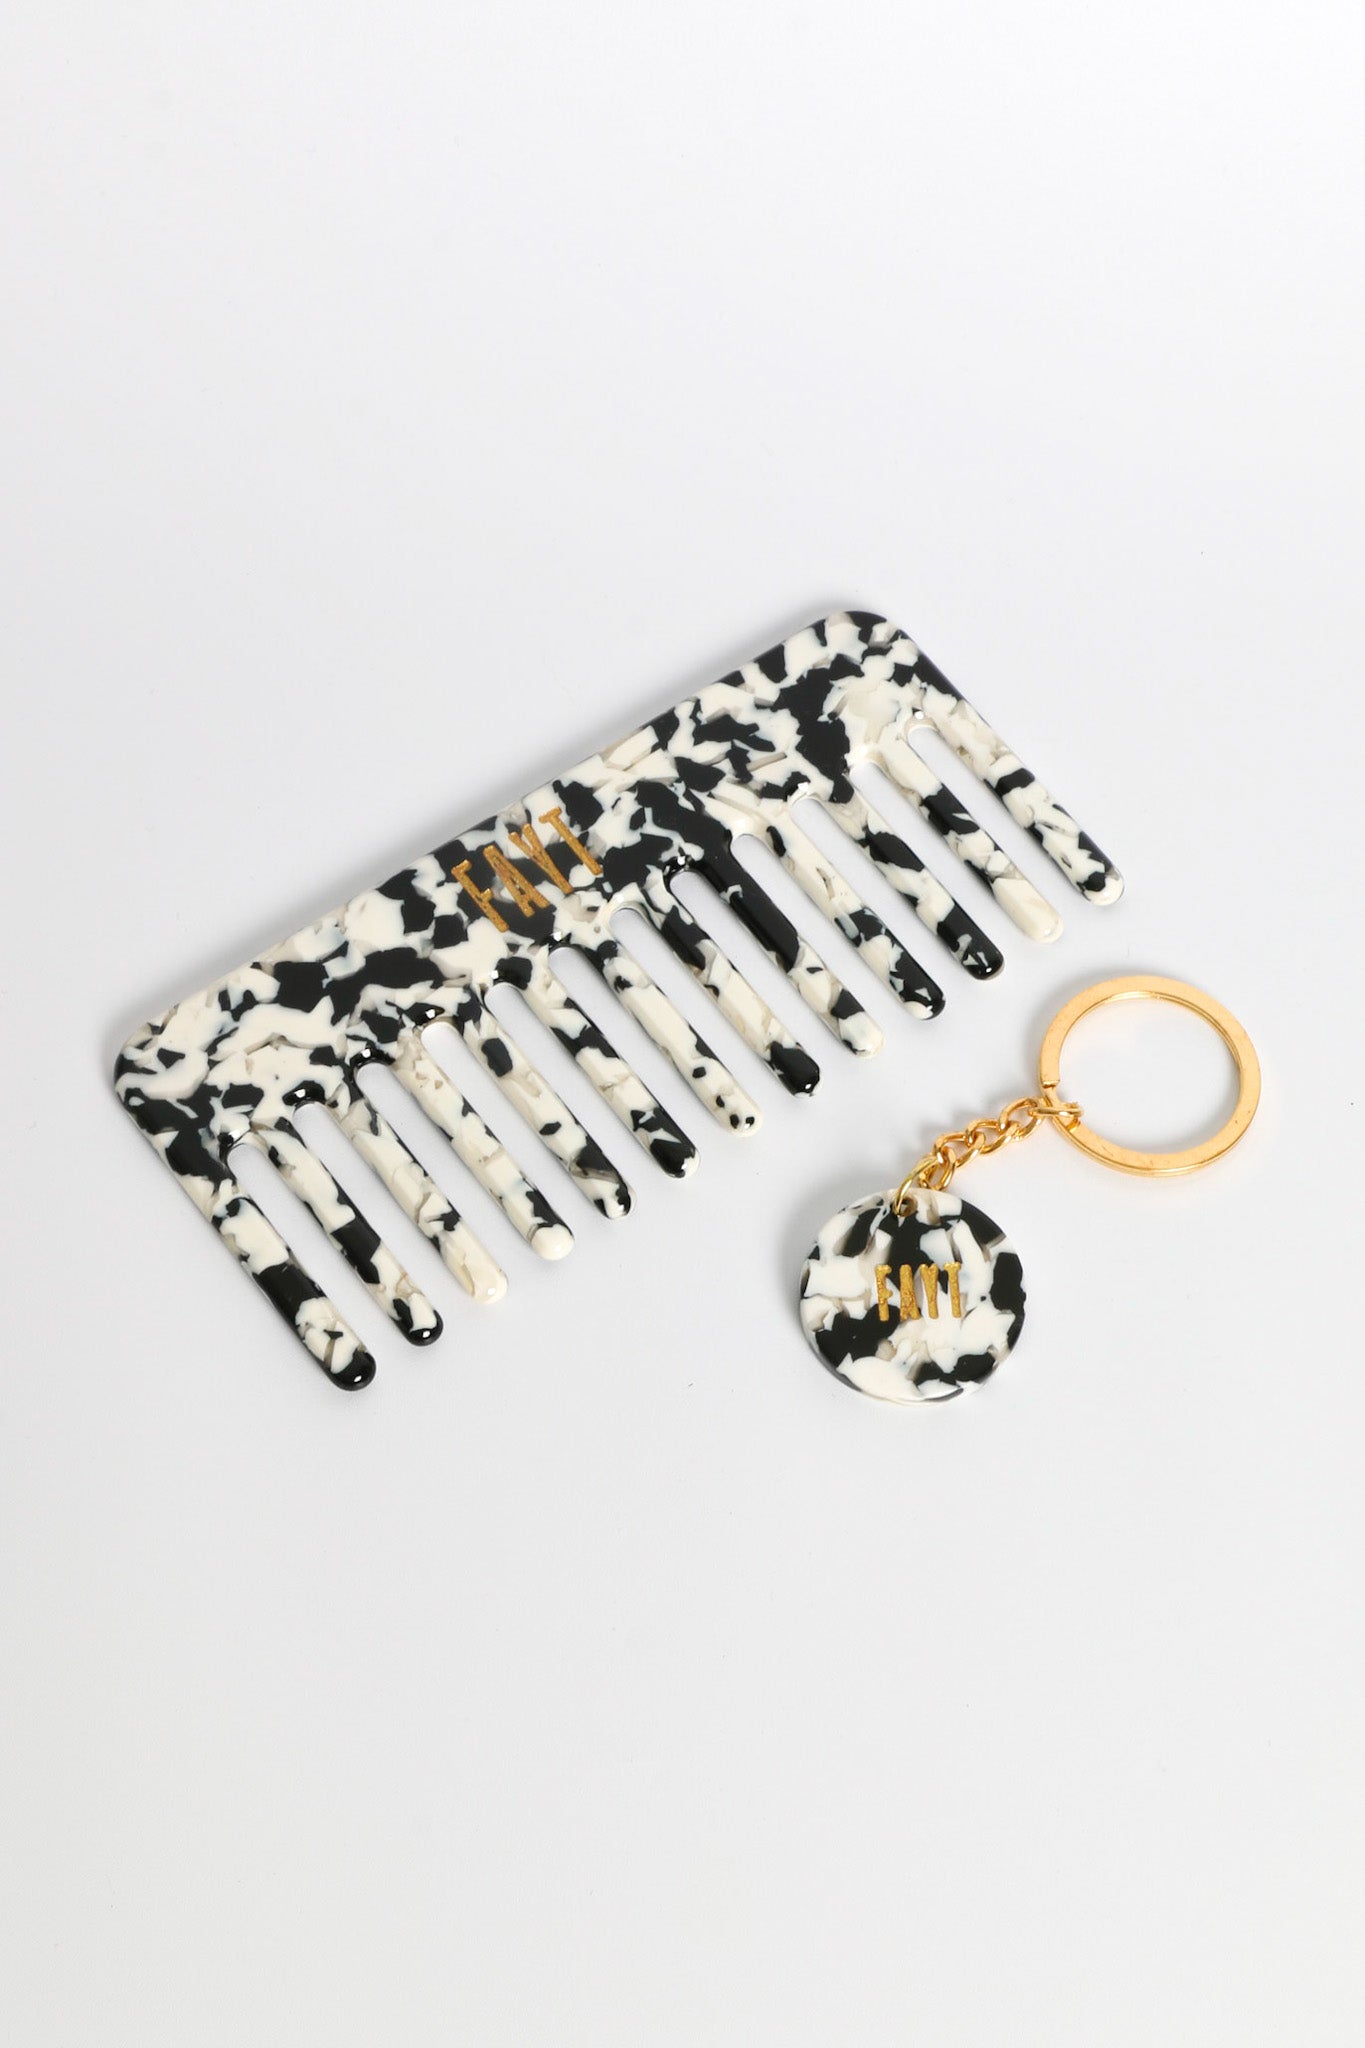 COMB AND KEYRING DUO MONOCHROME